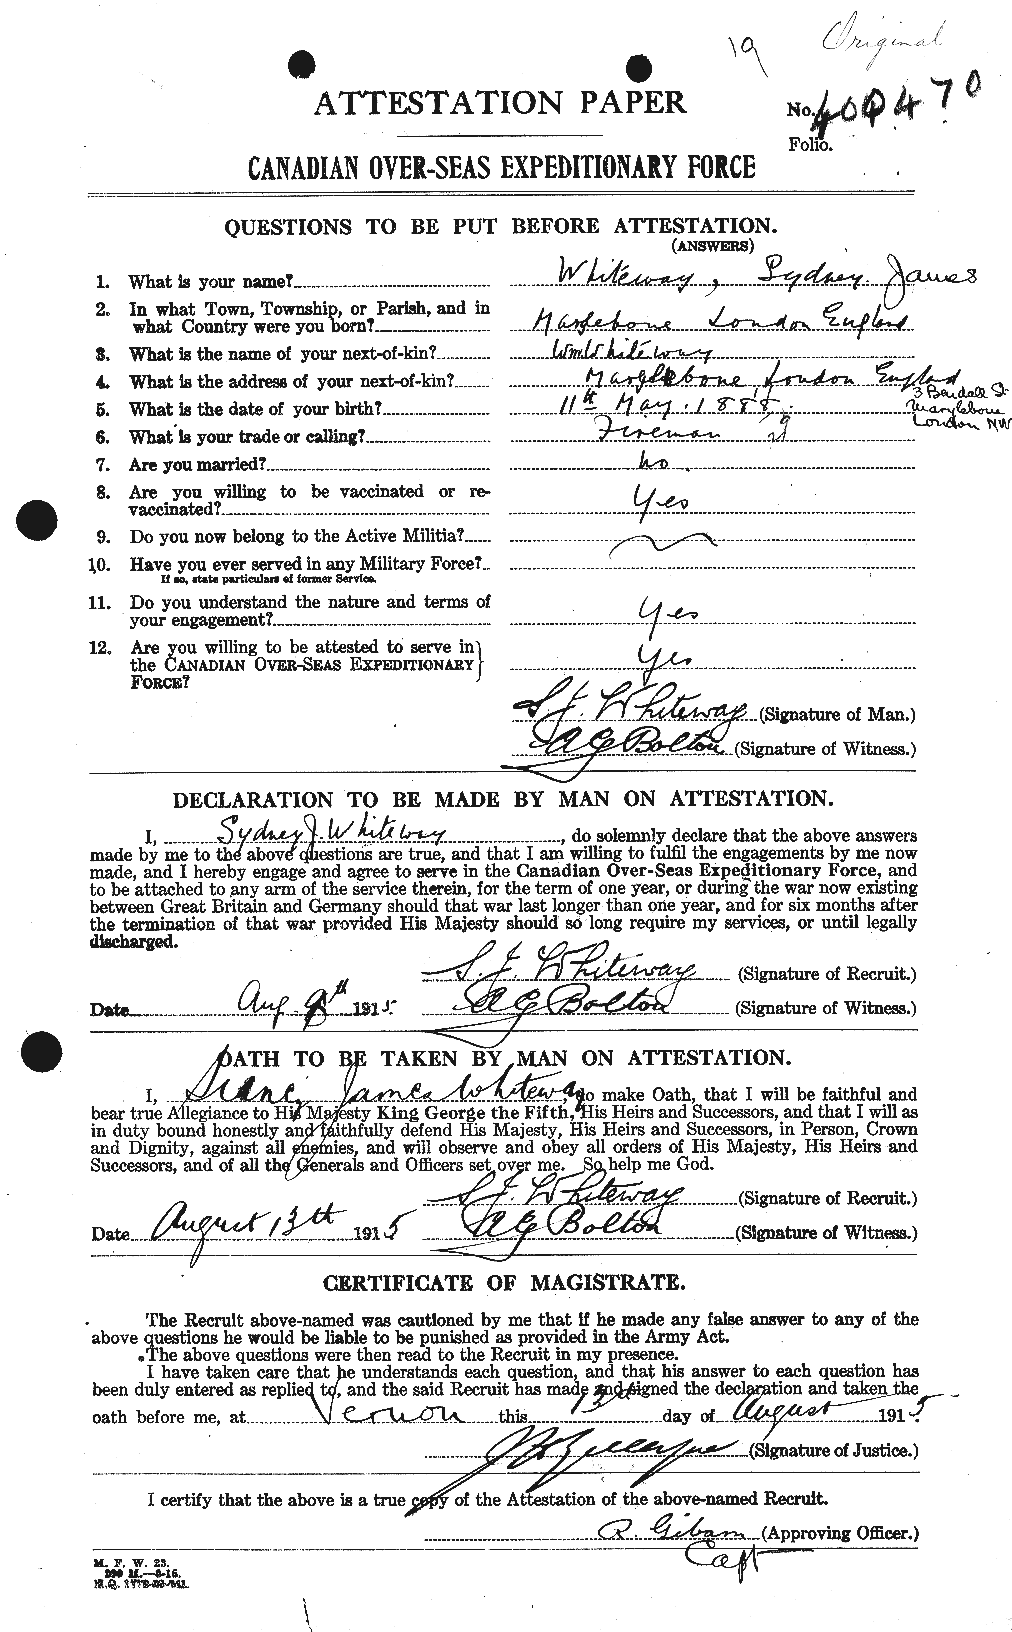 Personnel Records of the First World War - CEF 670665a